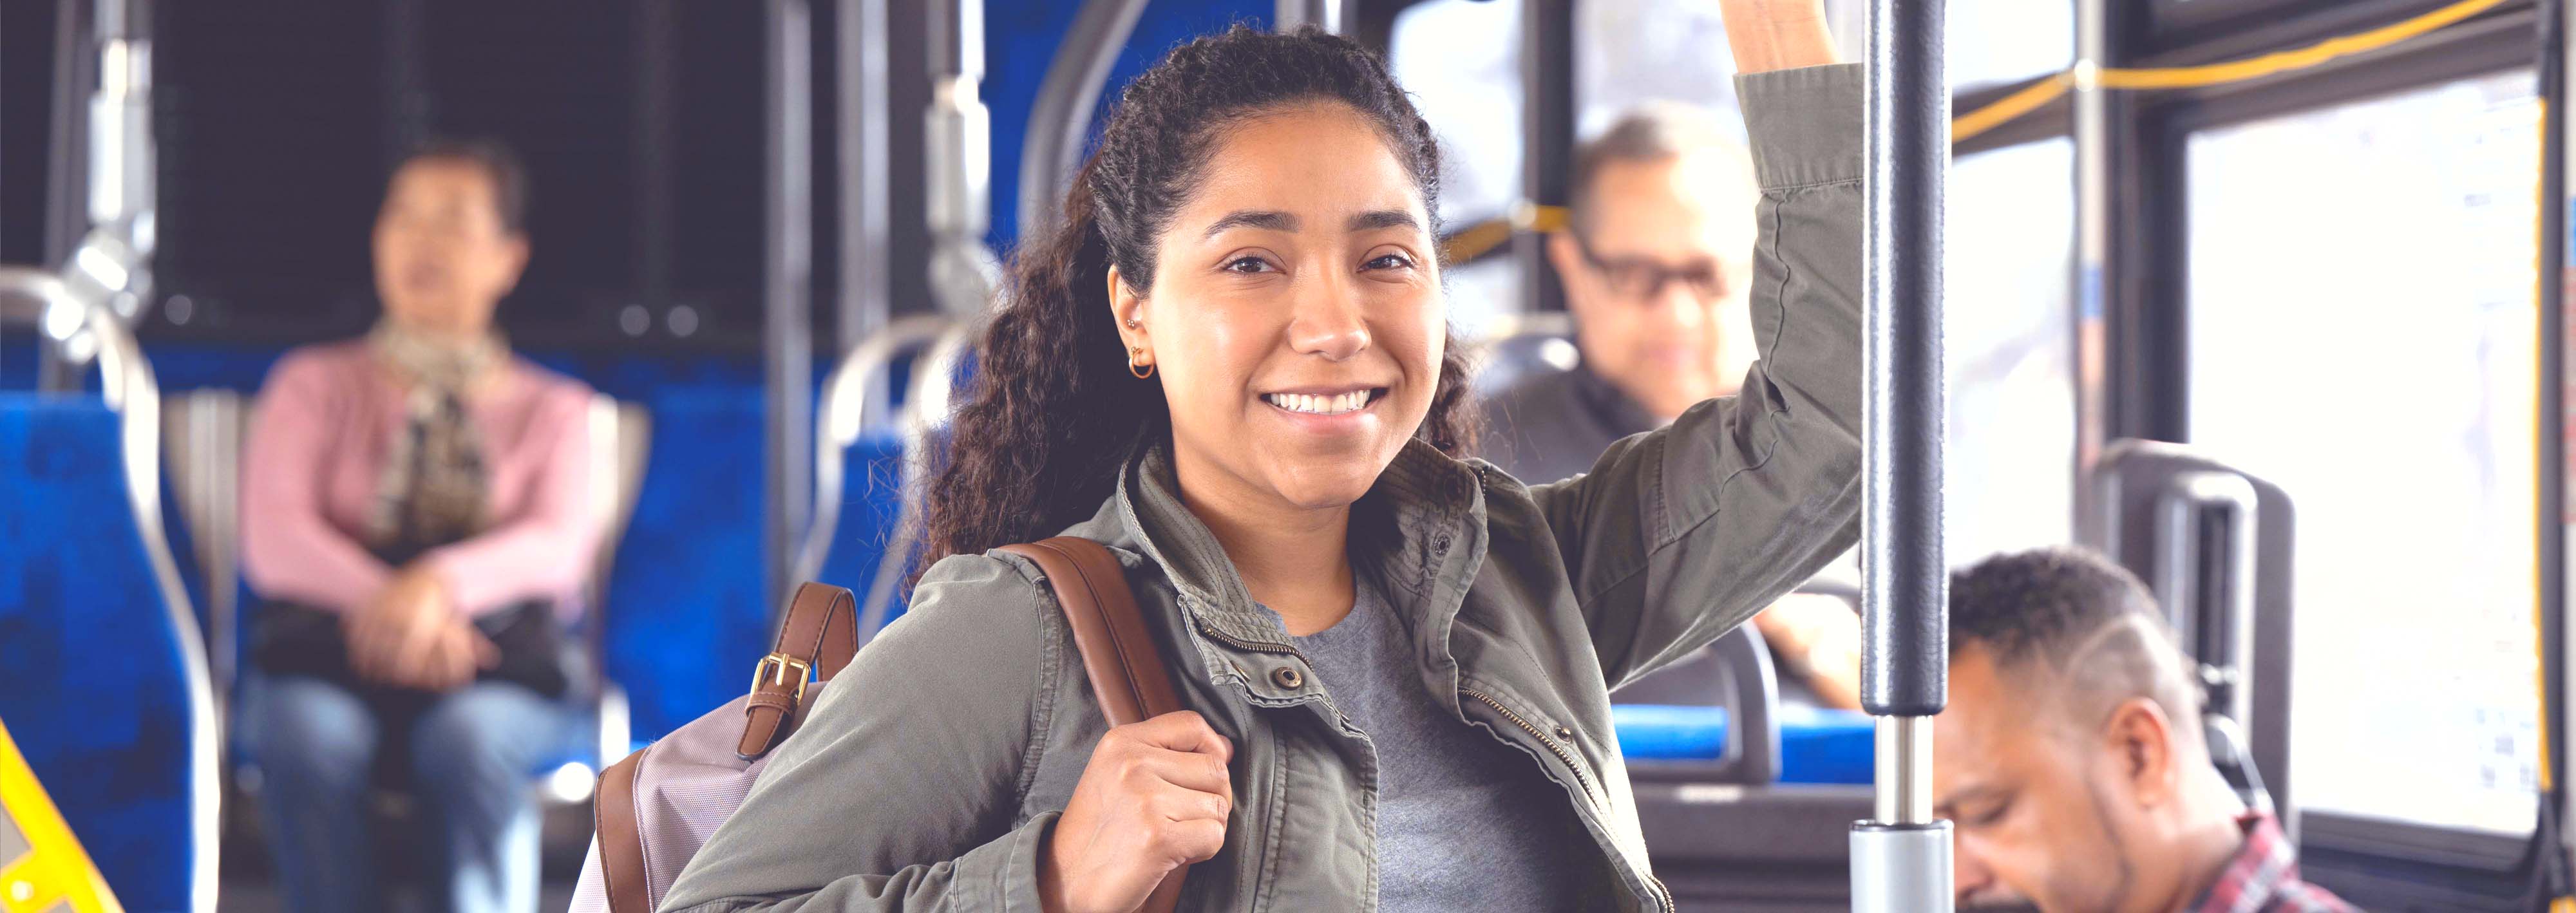 A young female rider smiles on the bus